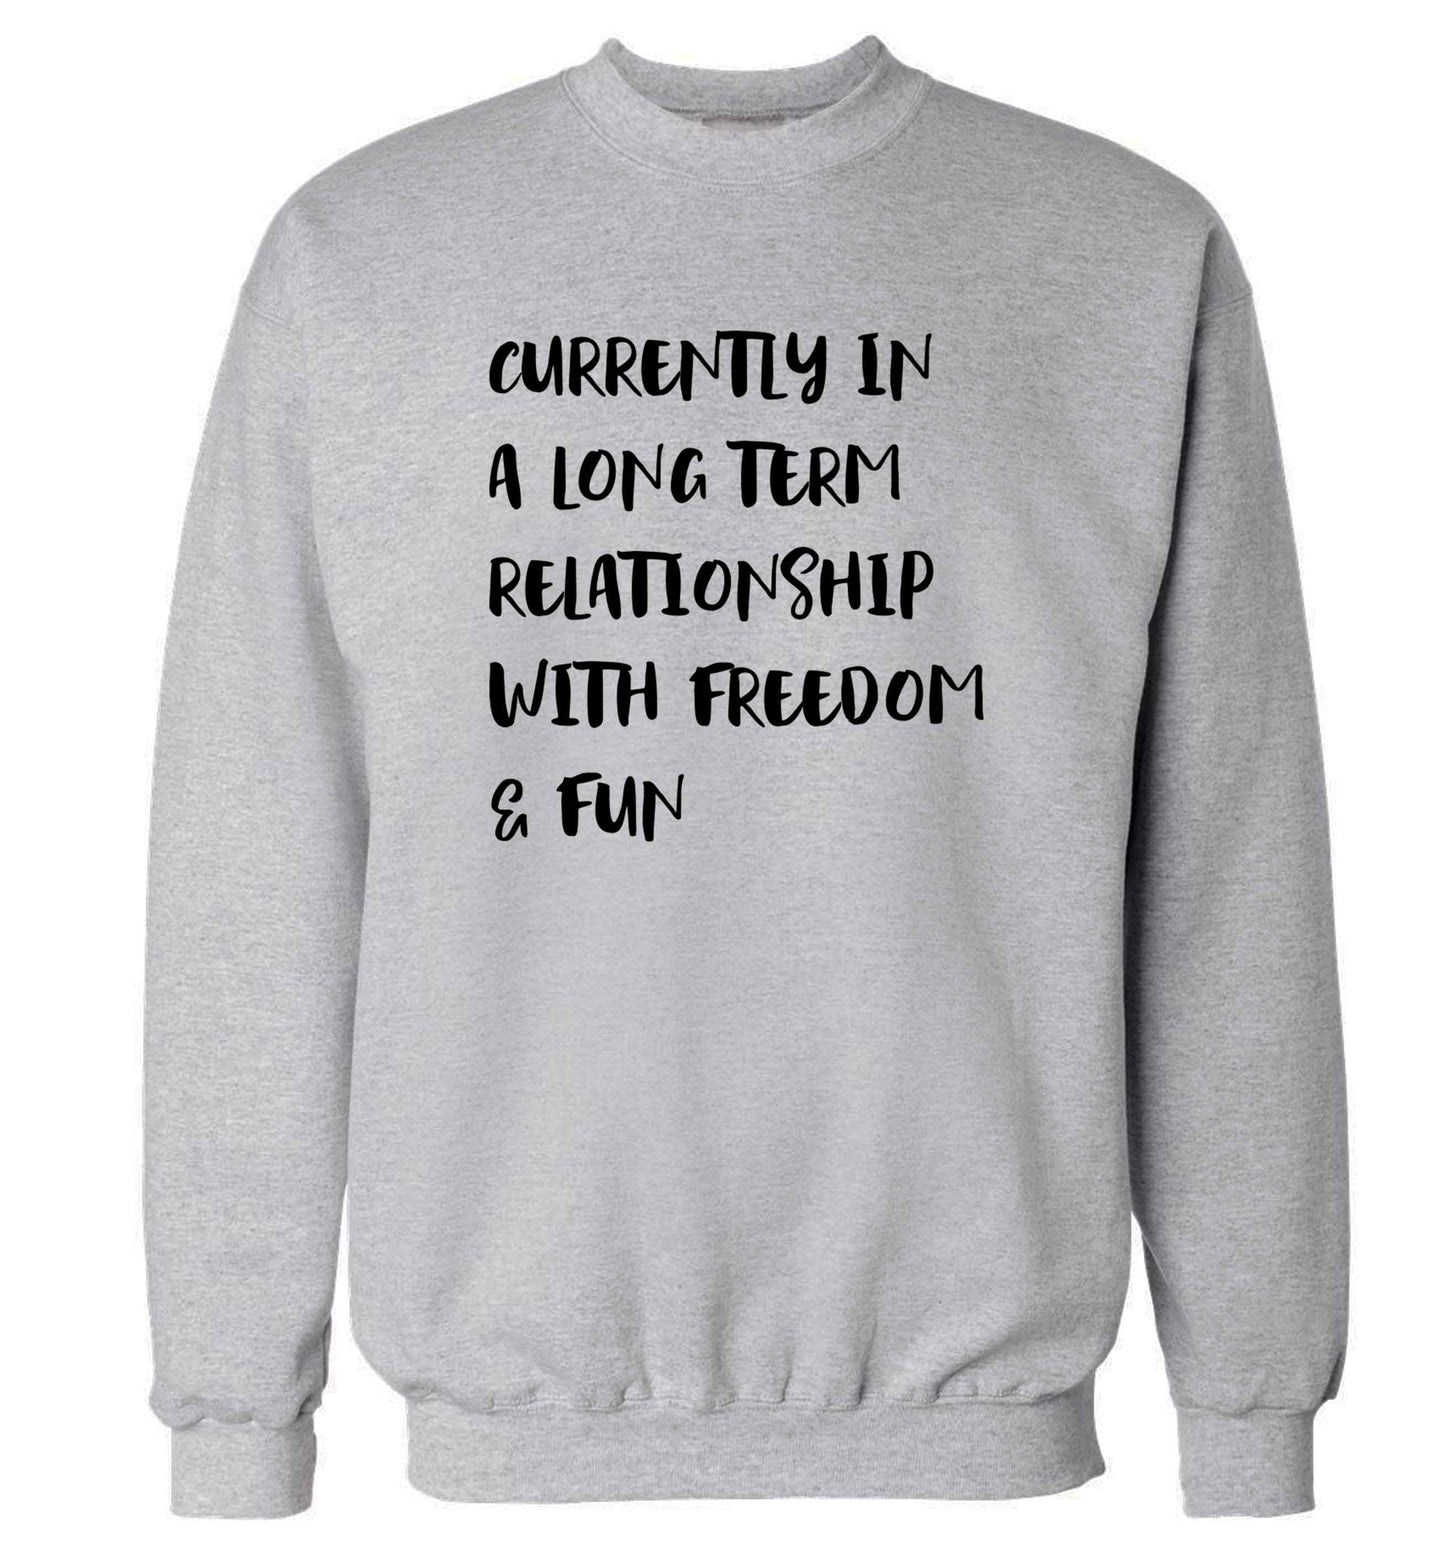 Currently in a long term relationship with freedom and fun adult's unisex grey sweater 2XL